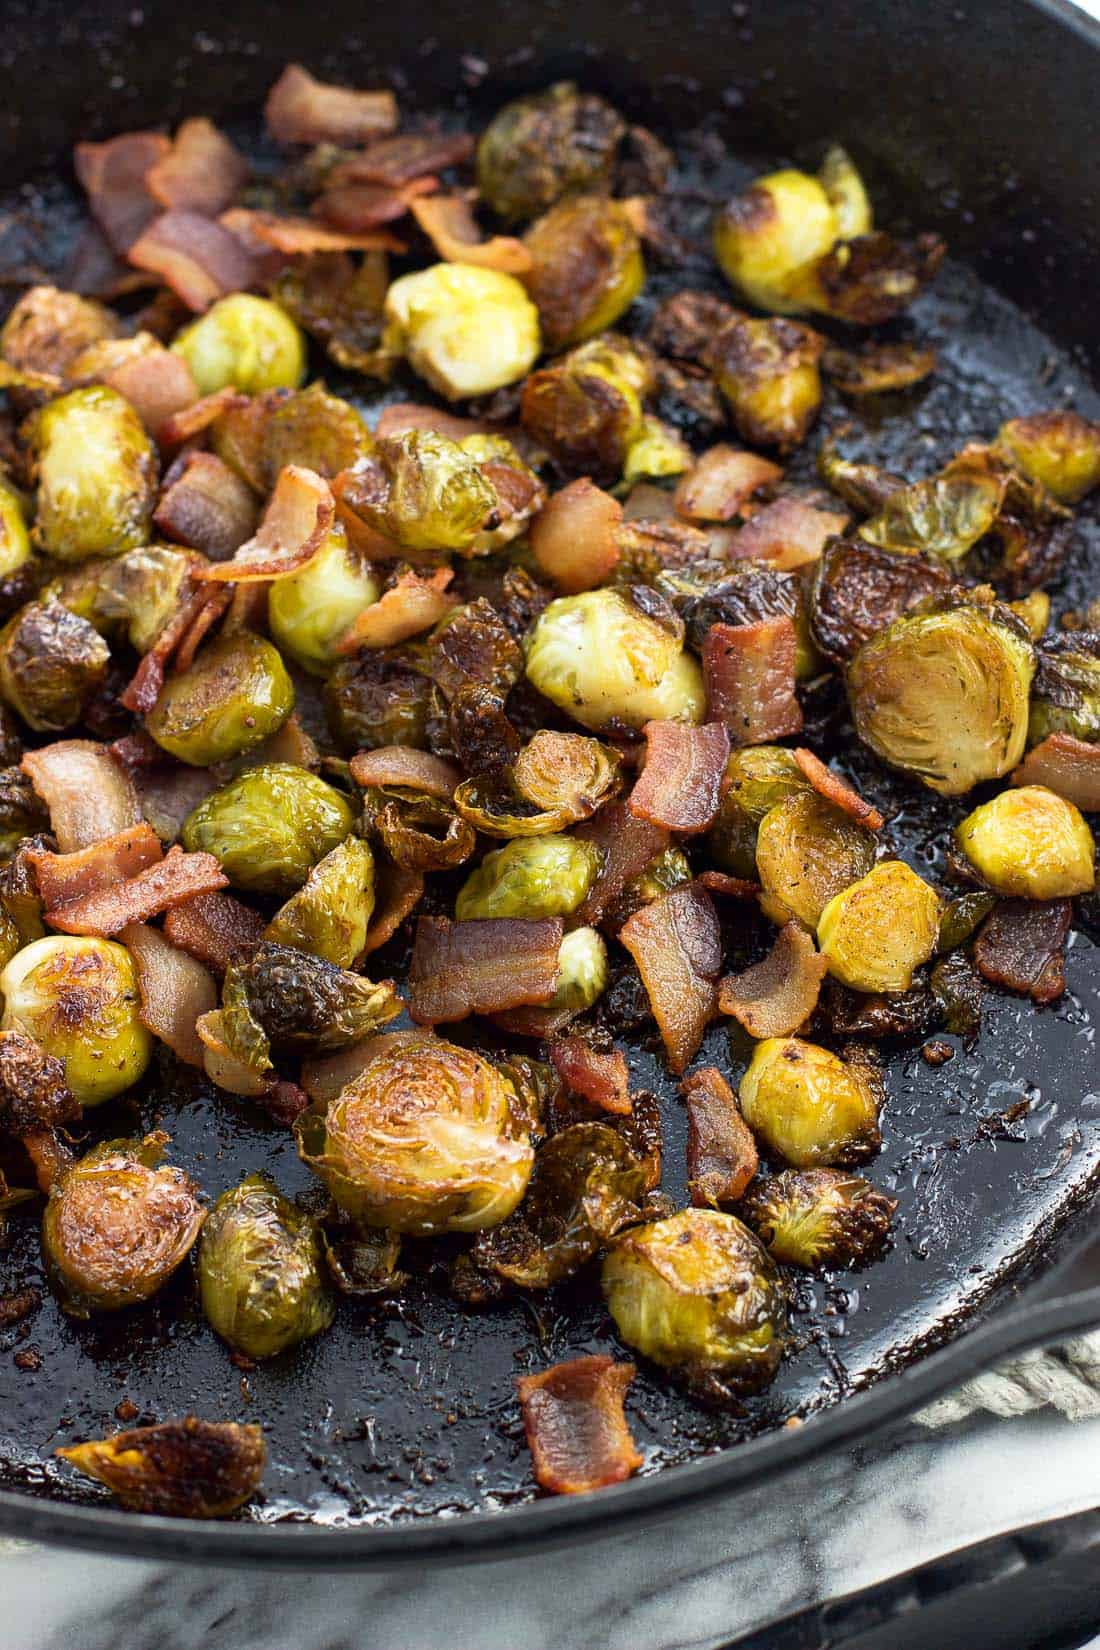 Bacon and brussels sprouts in a cast iron skillet